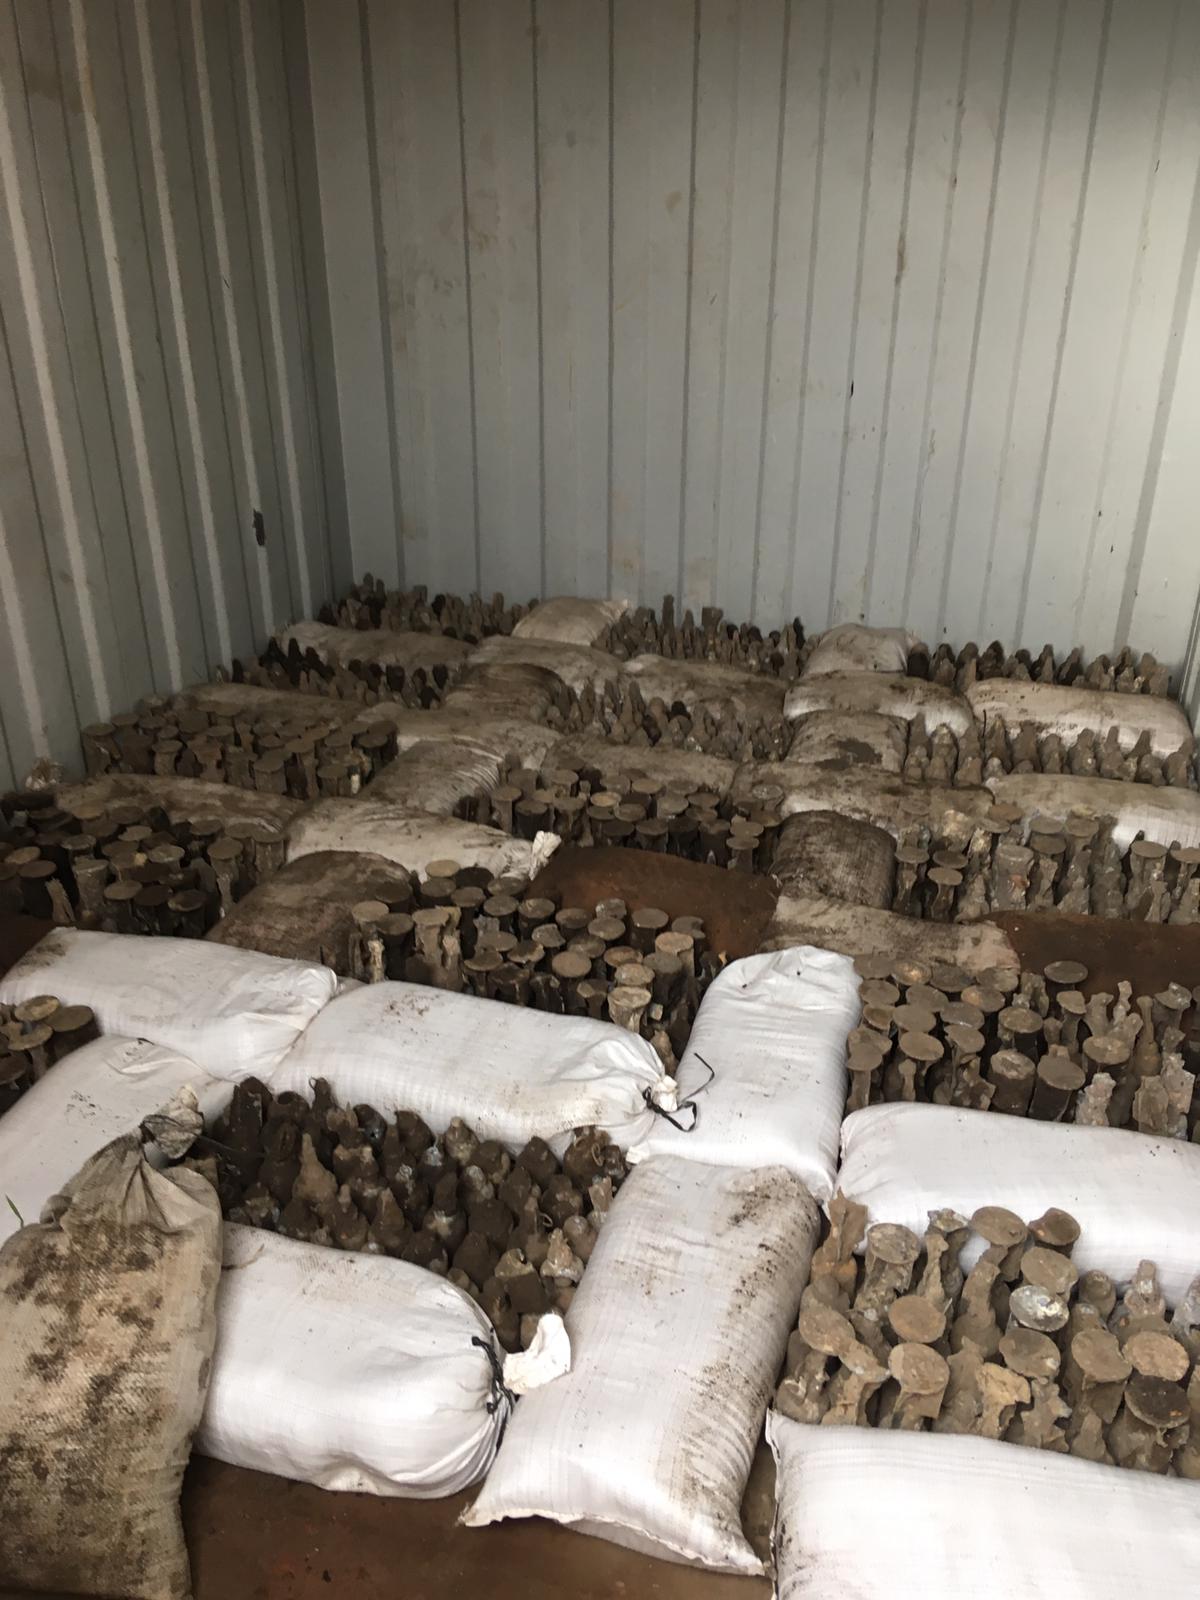 Stored rifle grenades ready for disposal.